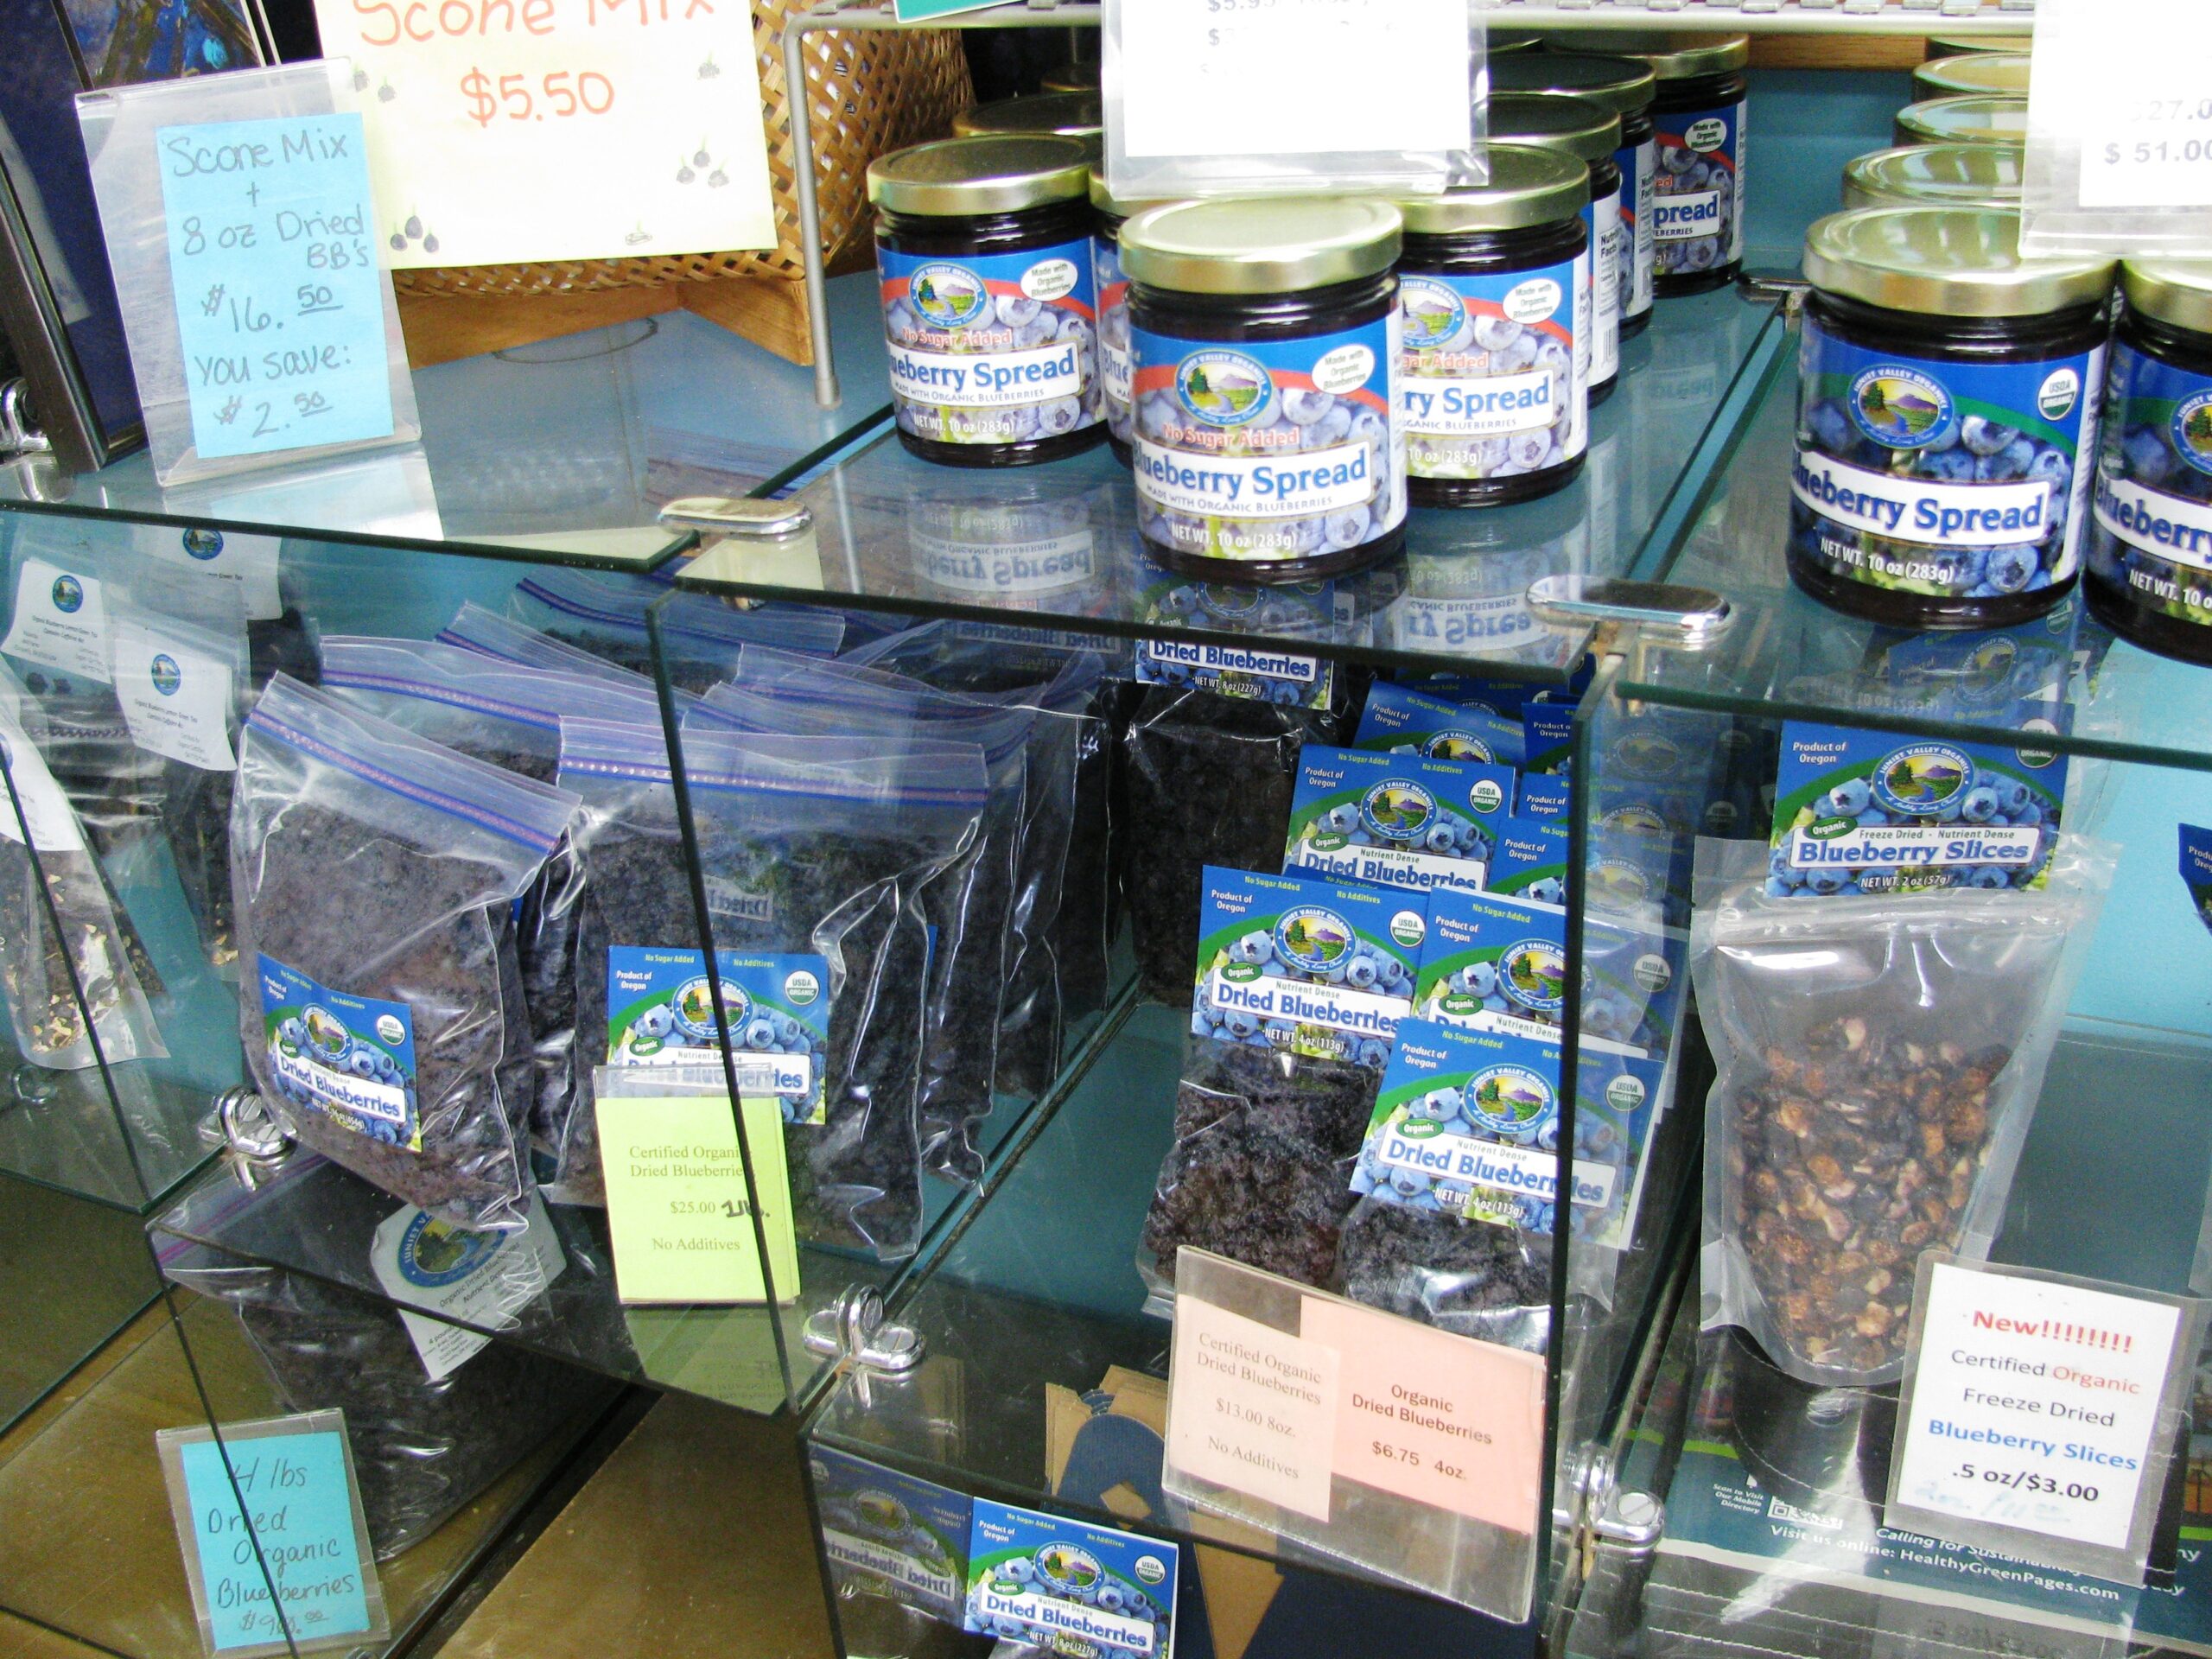 Our basic products are fresh and frozen berries, spreads, and dried blueberries. 